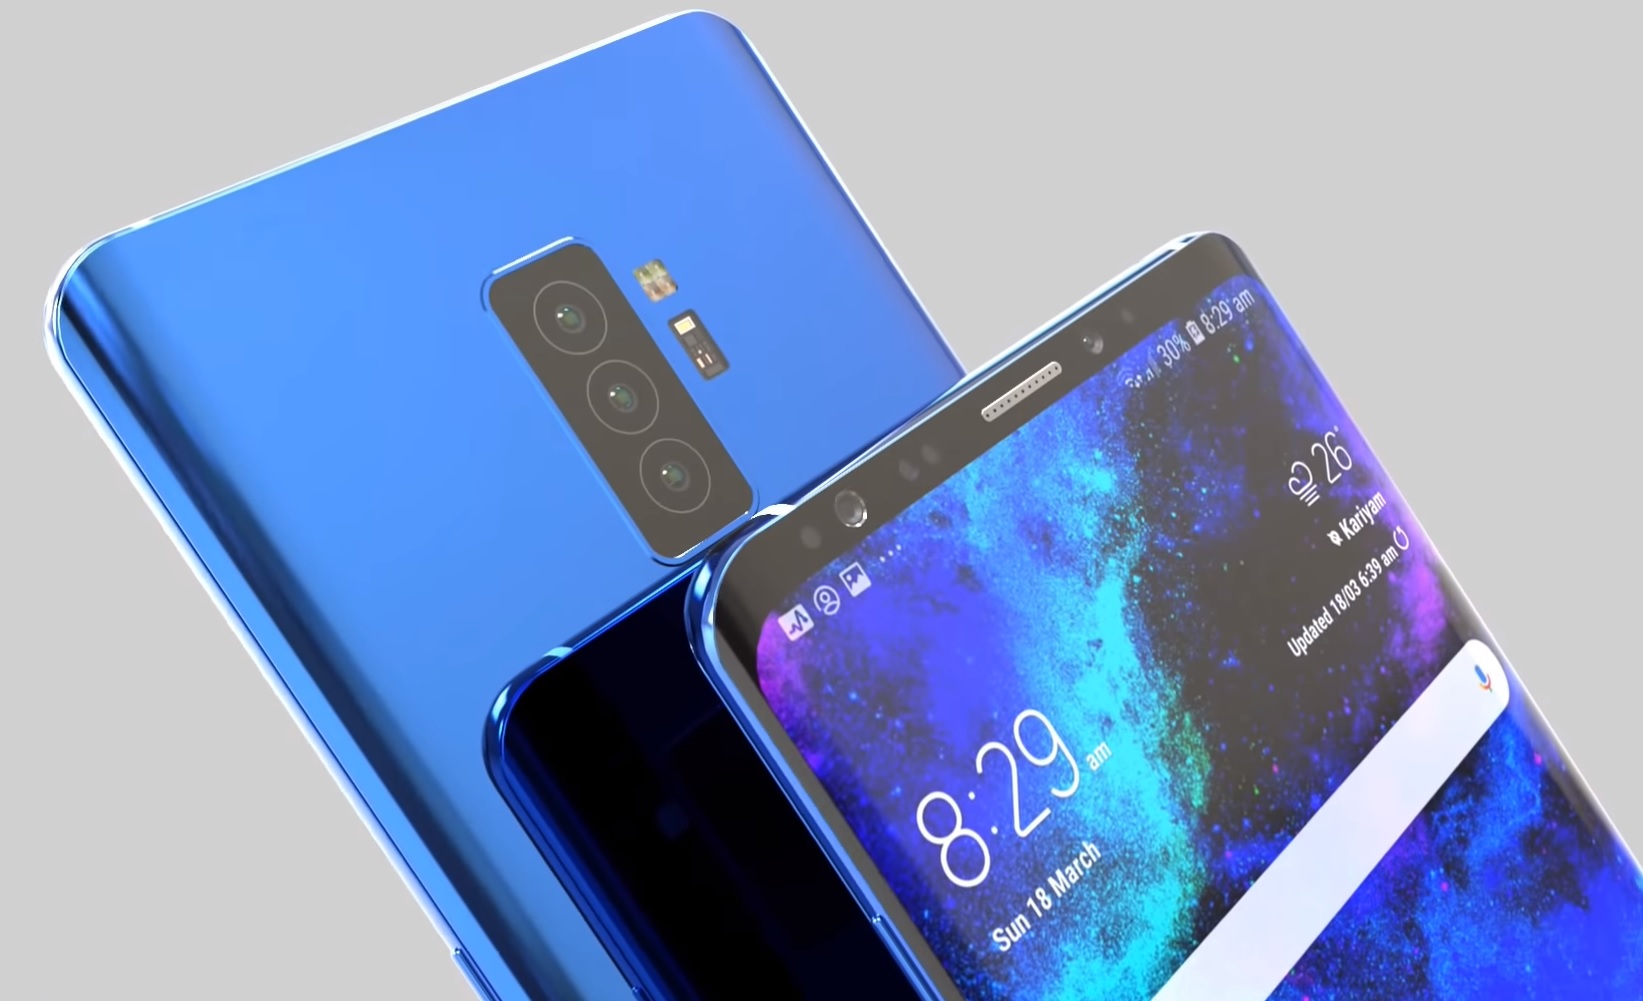 The Samsung Galaxy S10+ flagship might feature five